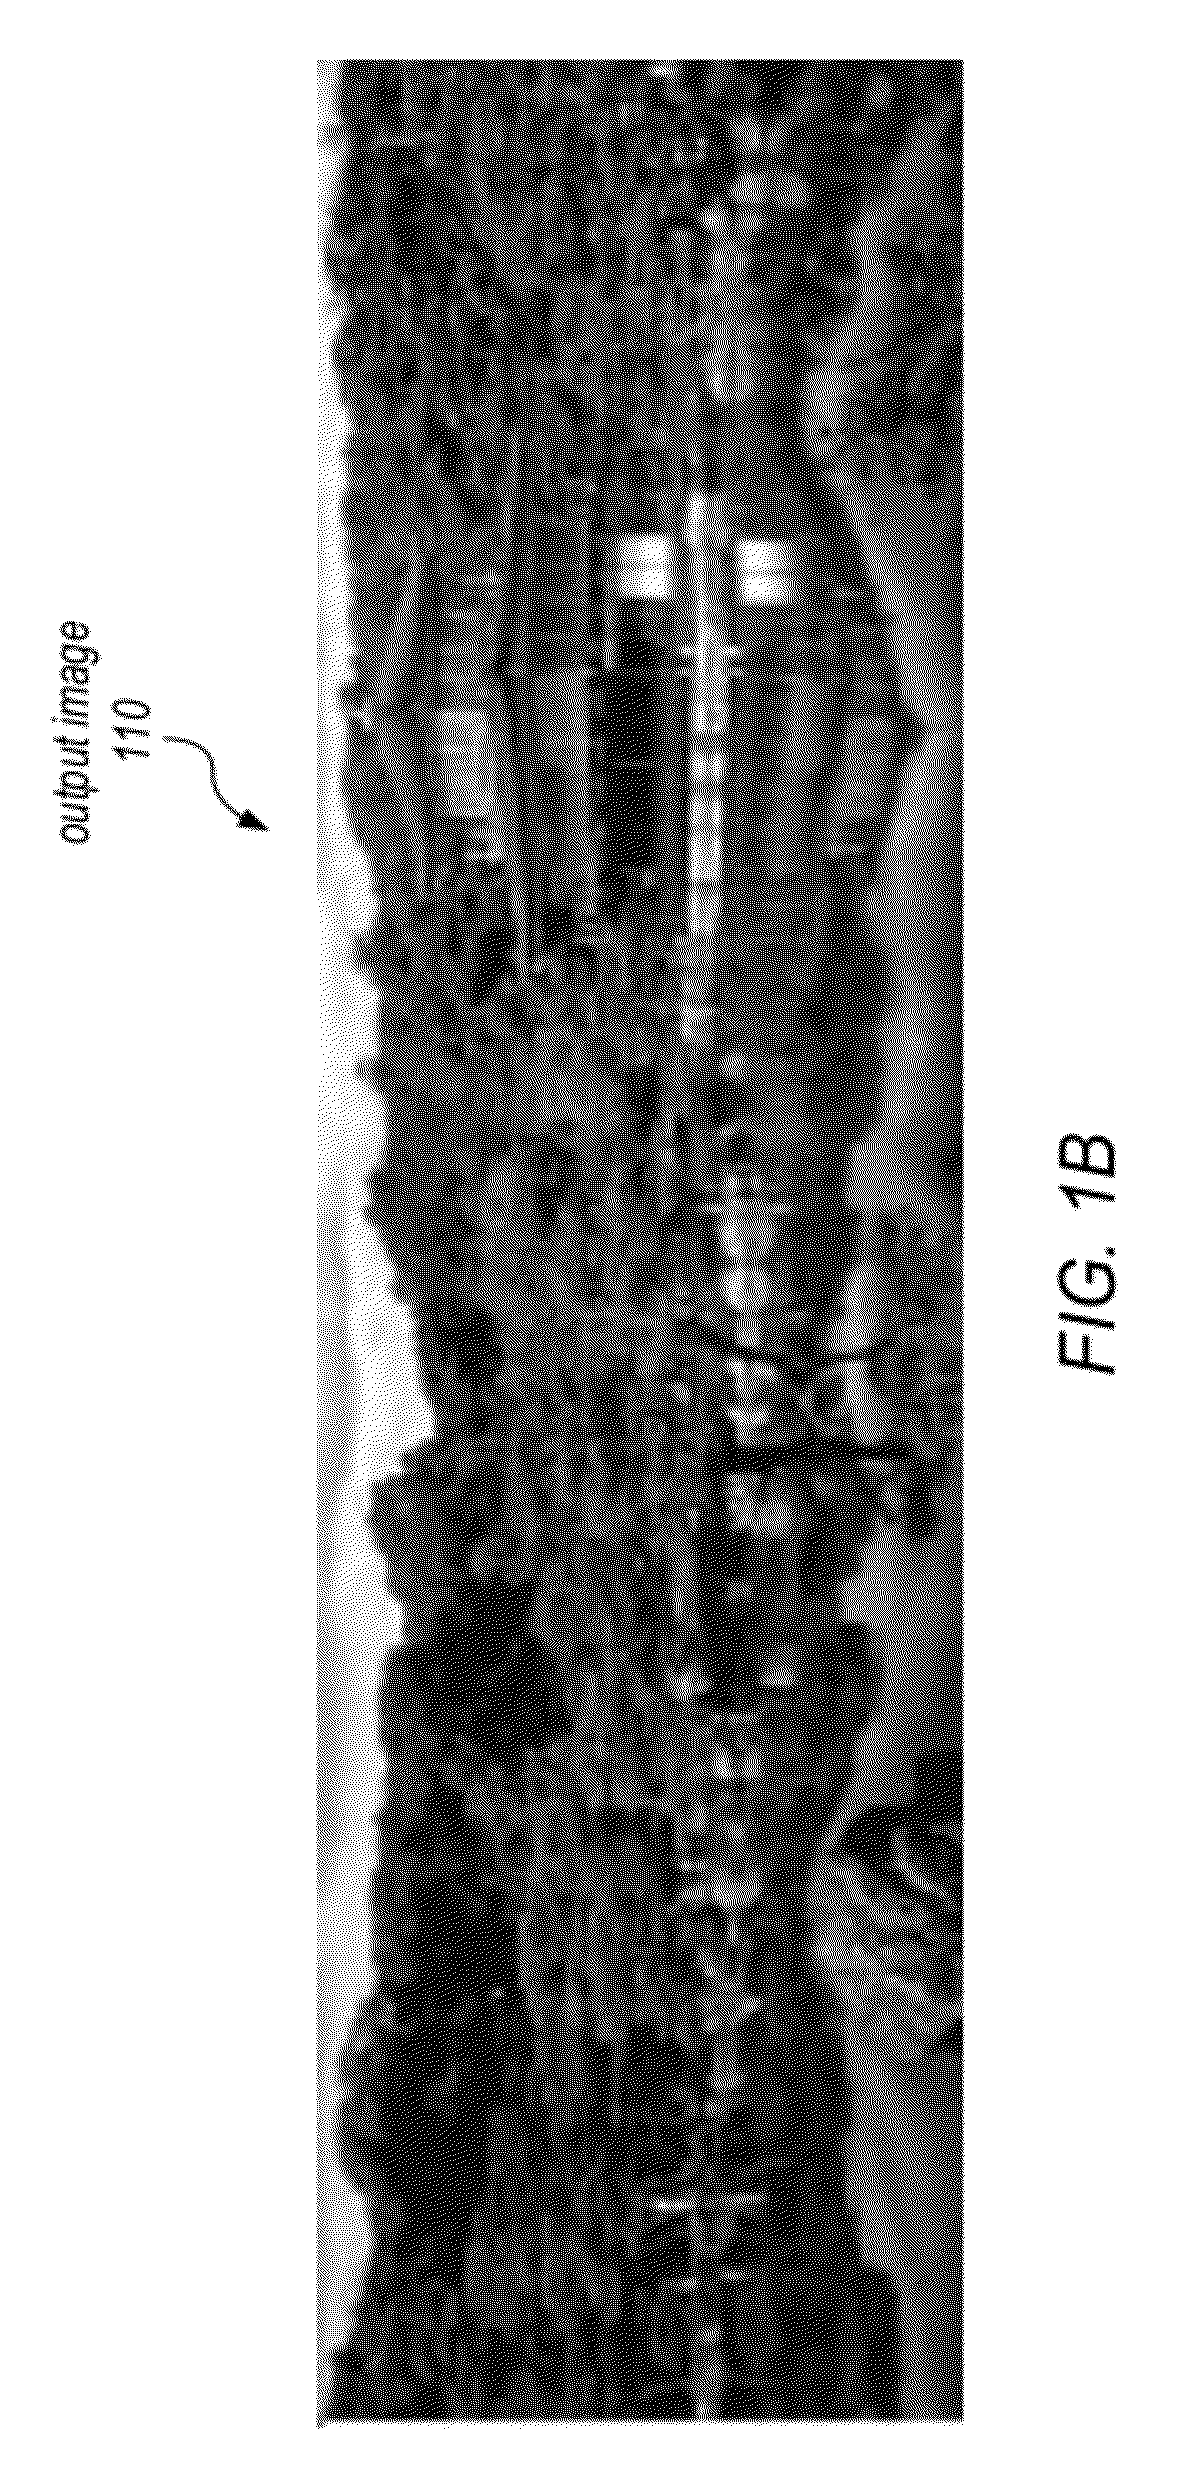 Seam-based reduction and expansion of images using parallel processing of retargeting matrix strips